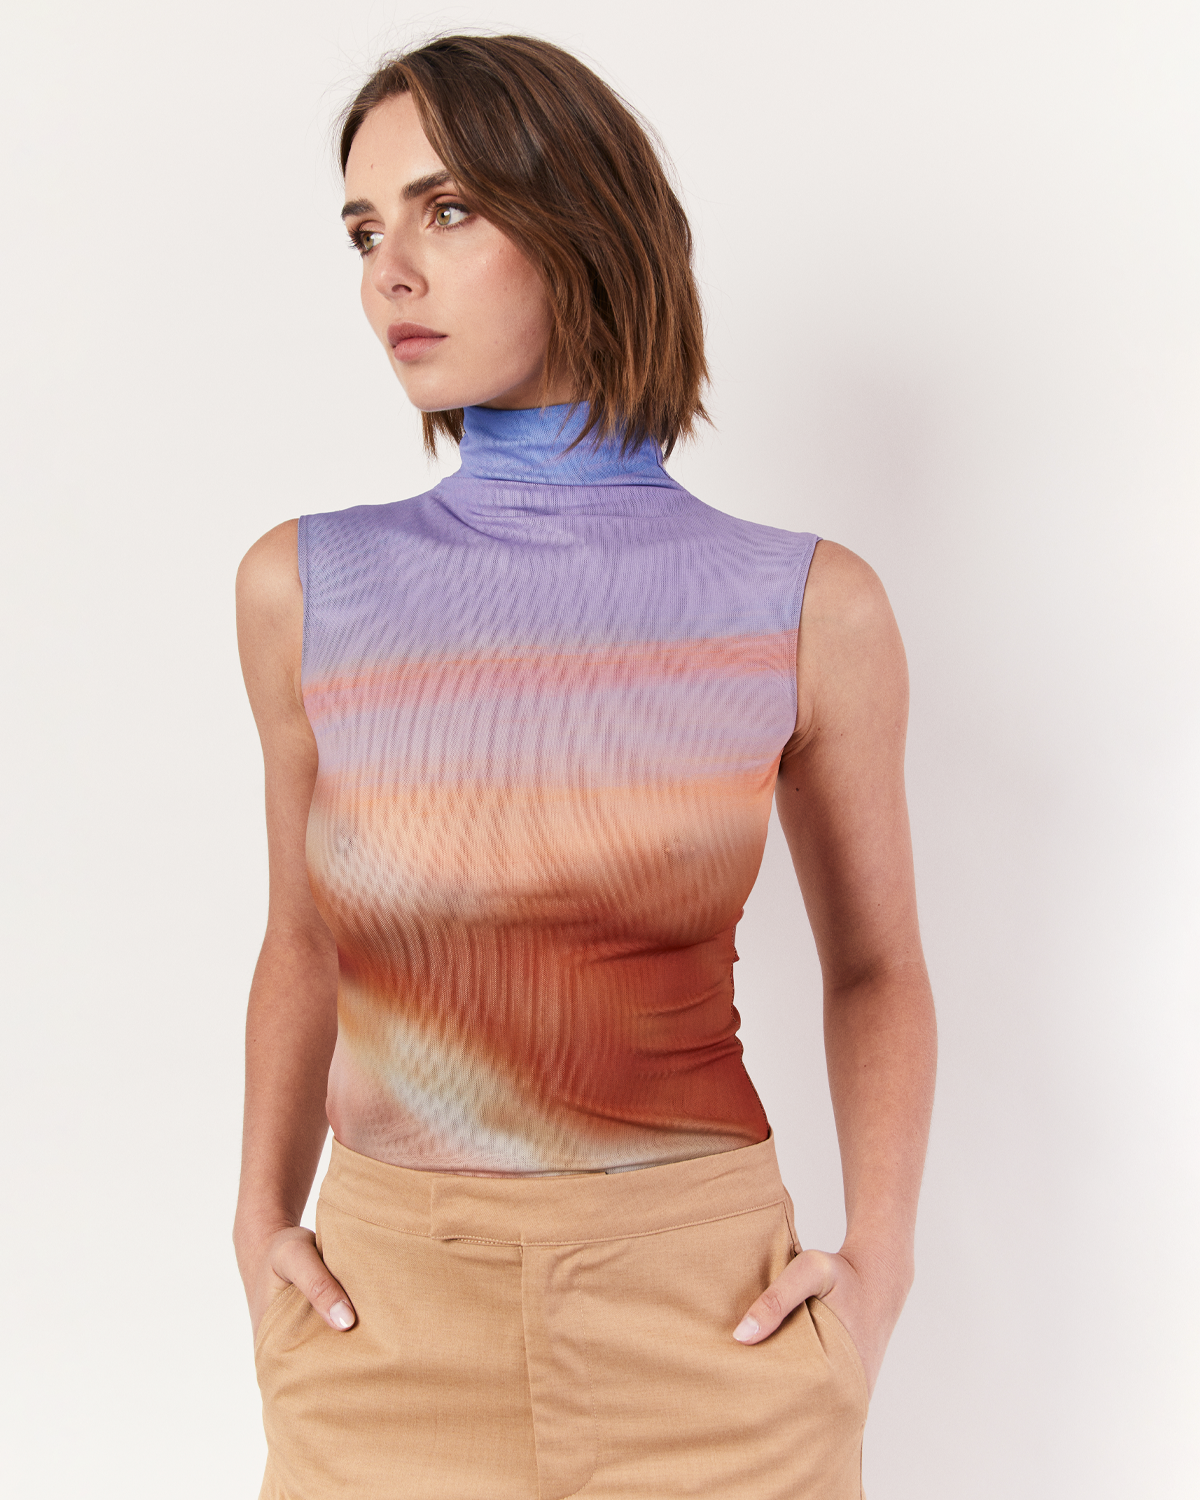 Introducing our exclusive Funneneck Tank in the breathtaking Romy Sunset Vista print. Embrace the beauty of the horizon with this captivating design. Crafted from lightweight mesh, this tank offers both style and breathability, making it perfect for warm days or layered looks. Now available online at Romy. 